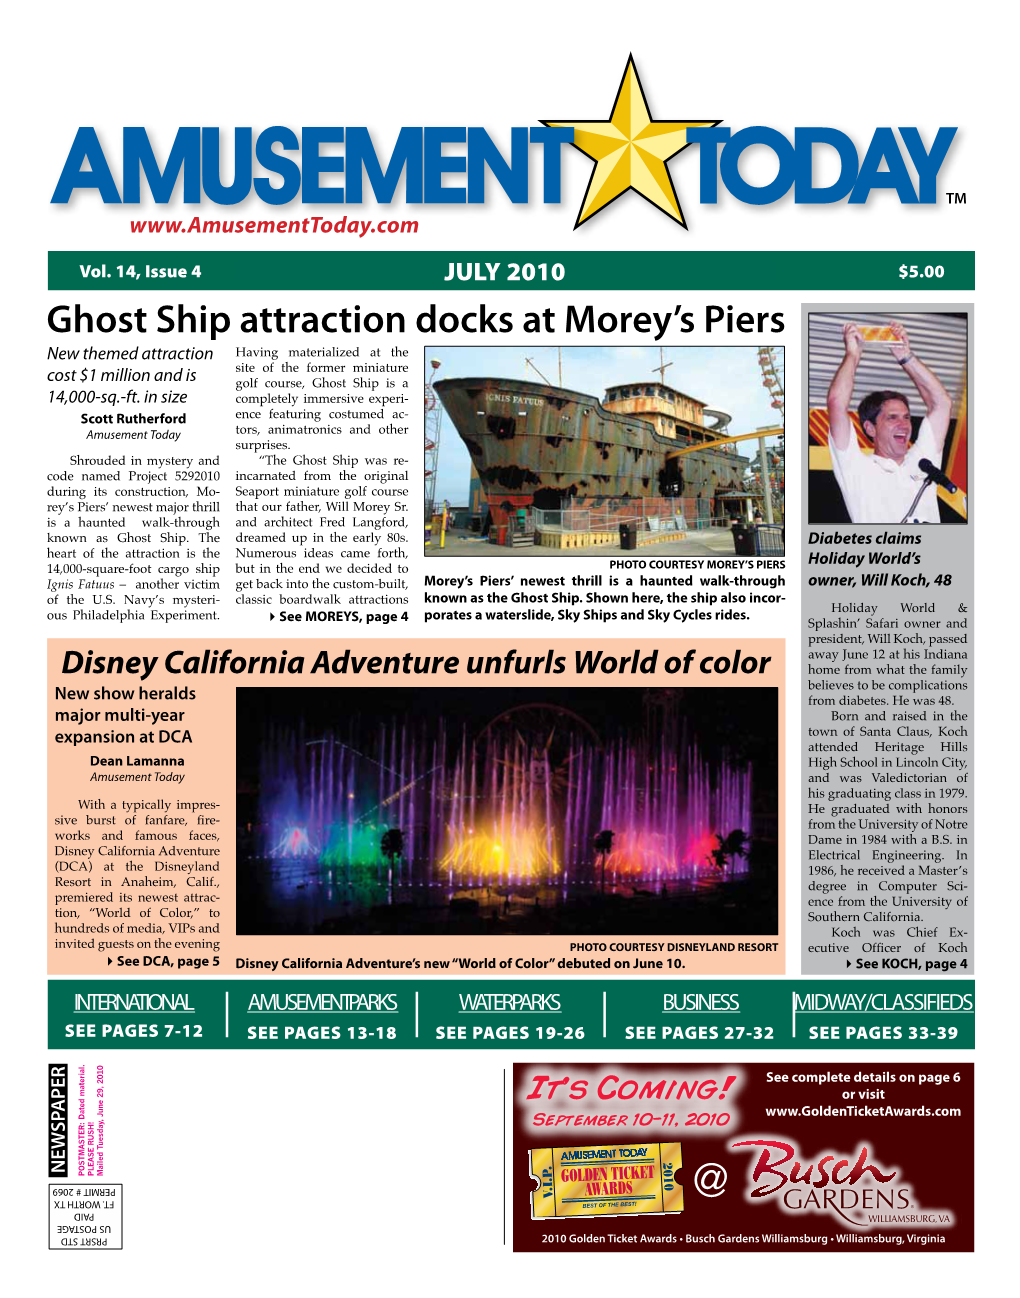 Ghost Ship Attraction Docks at Morey's Piers